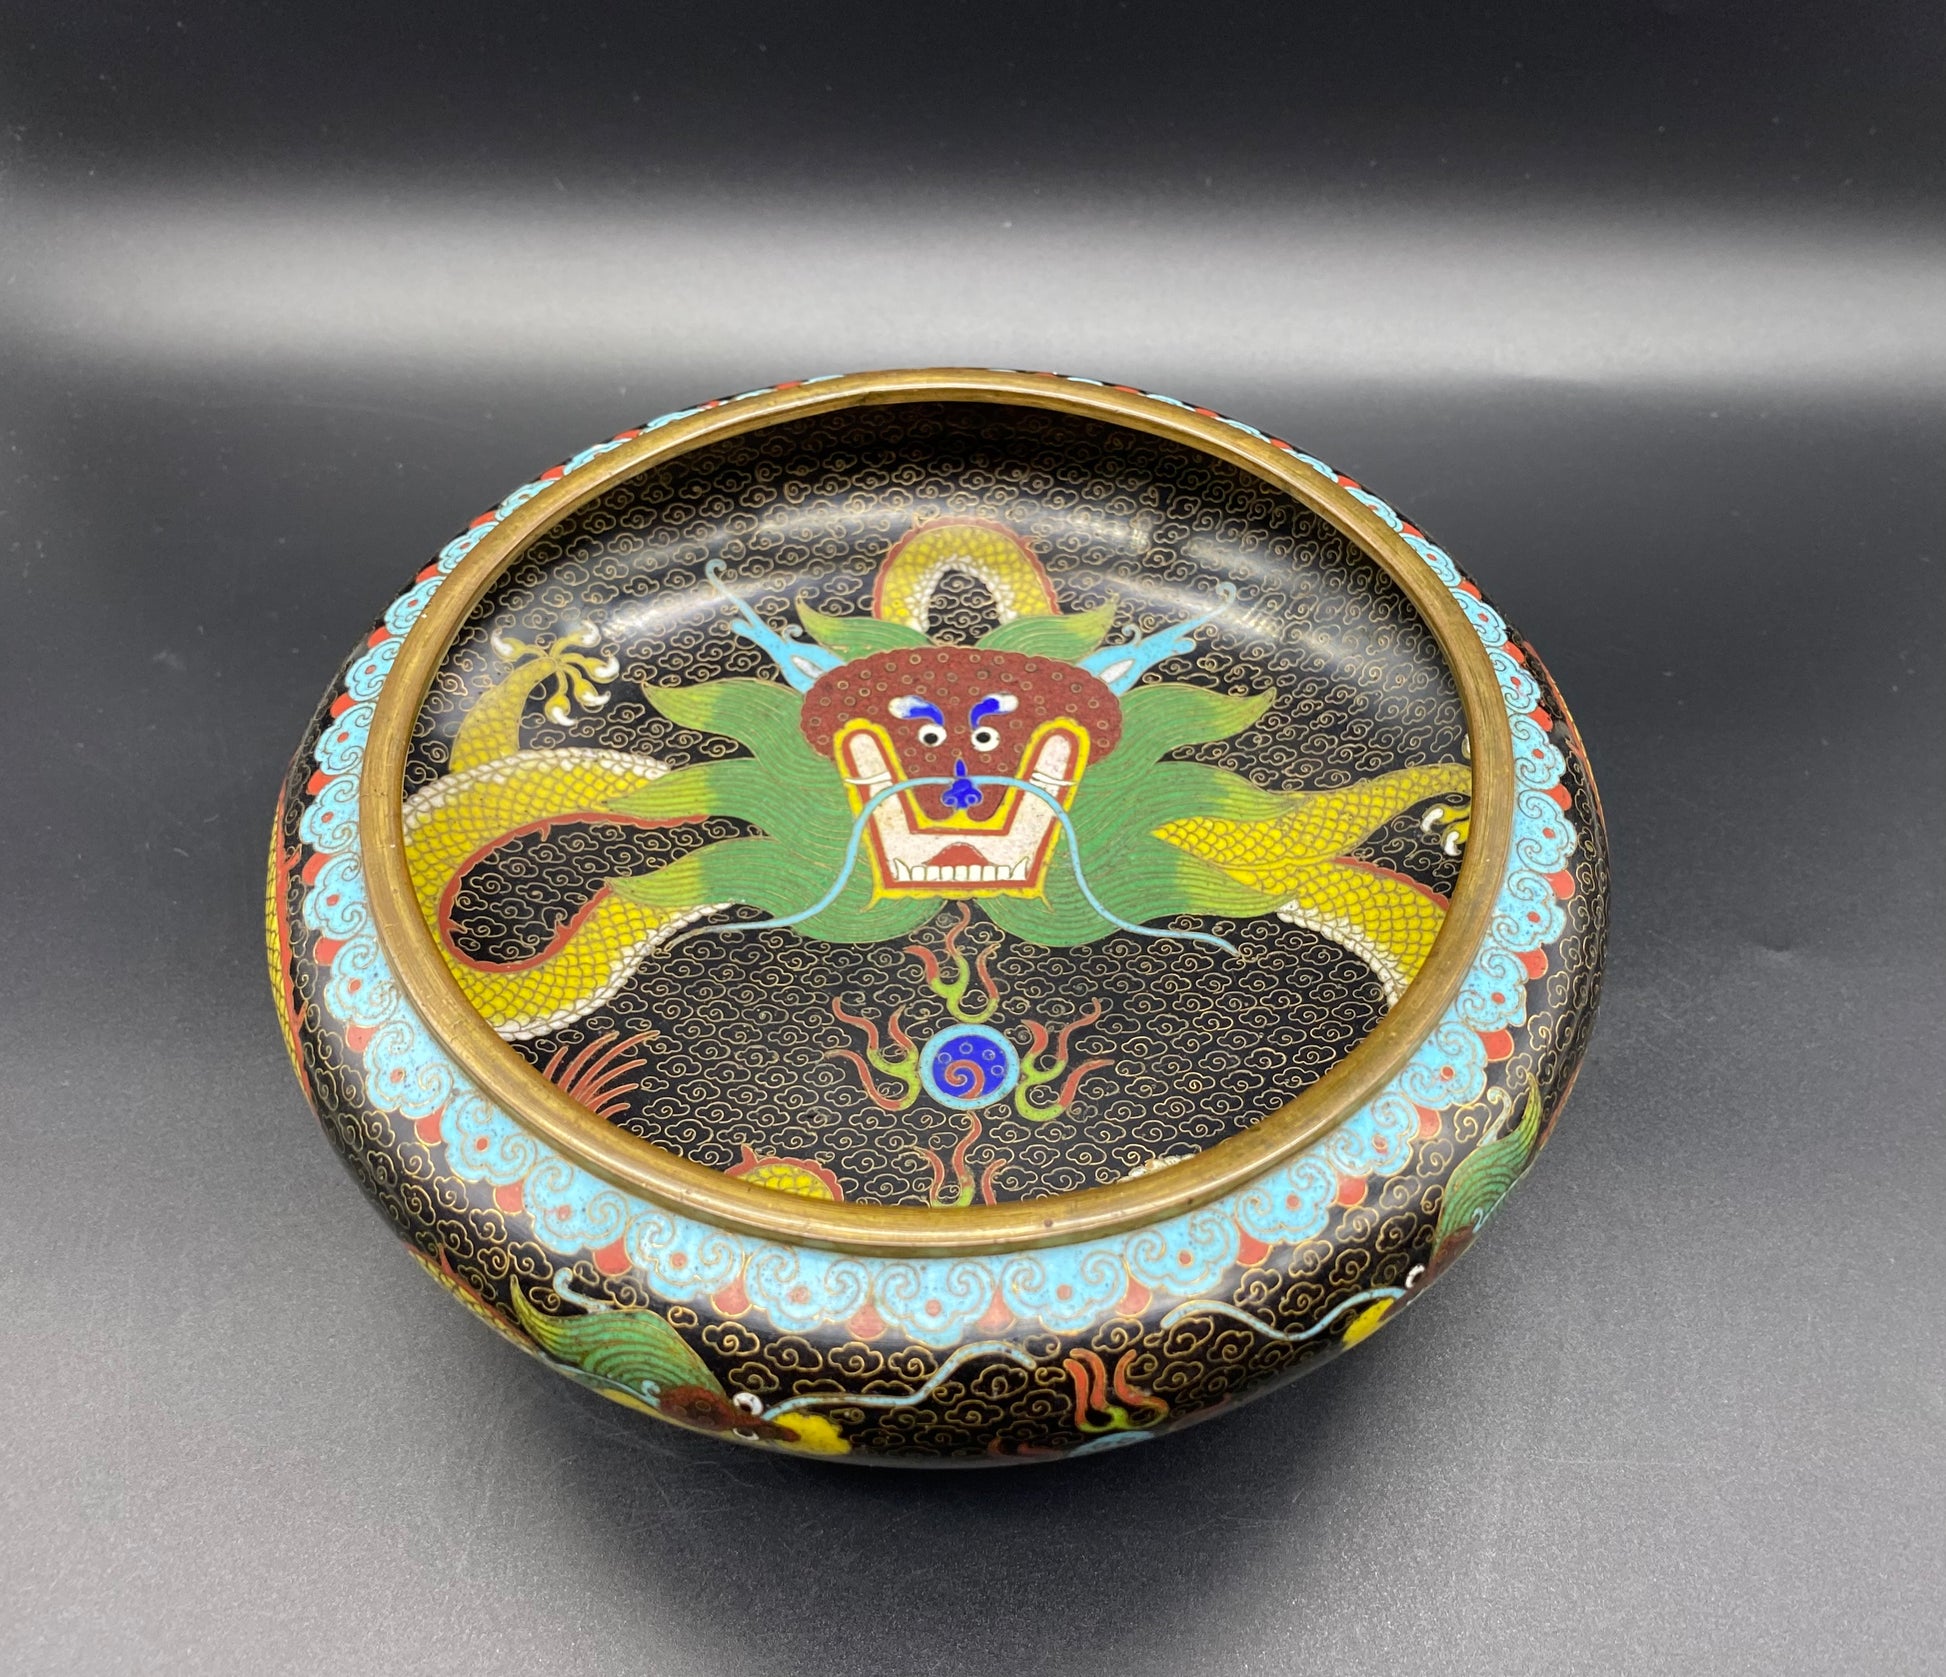 This is a fabulous antique Chinese Cloisonne Bowl it has a black ground covered all over with a cloud pattern. It also has a total of three colourful decorations of dragons. KB ANTIQUES & JEWELLERY 